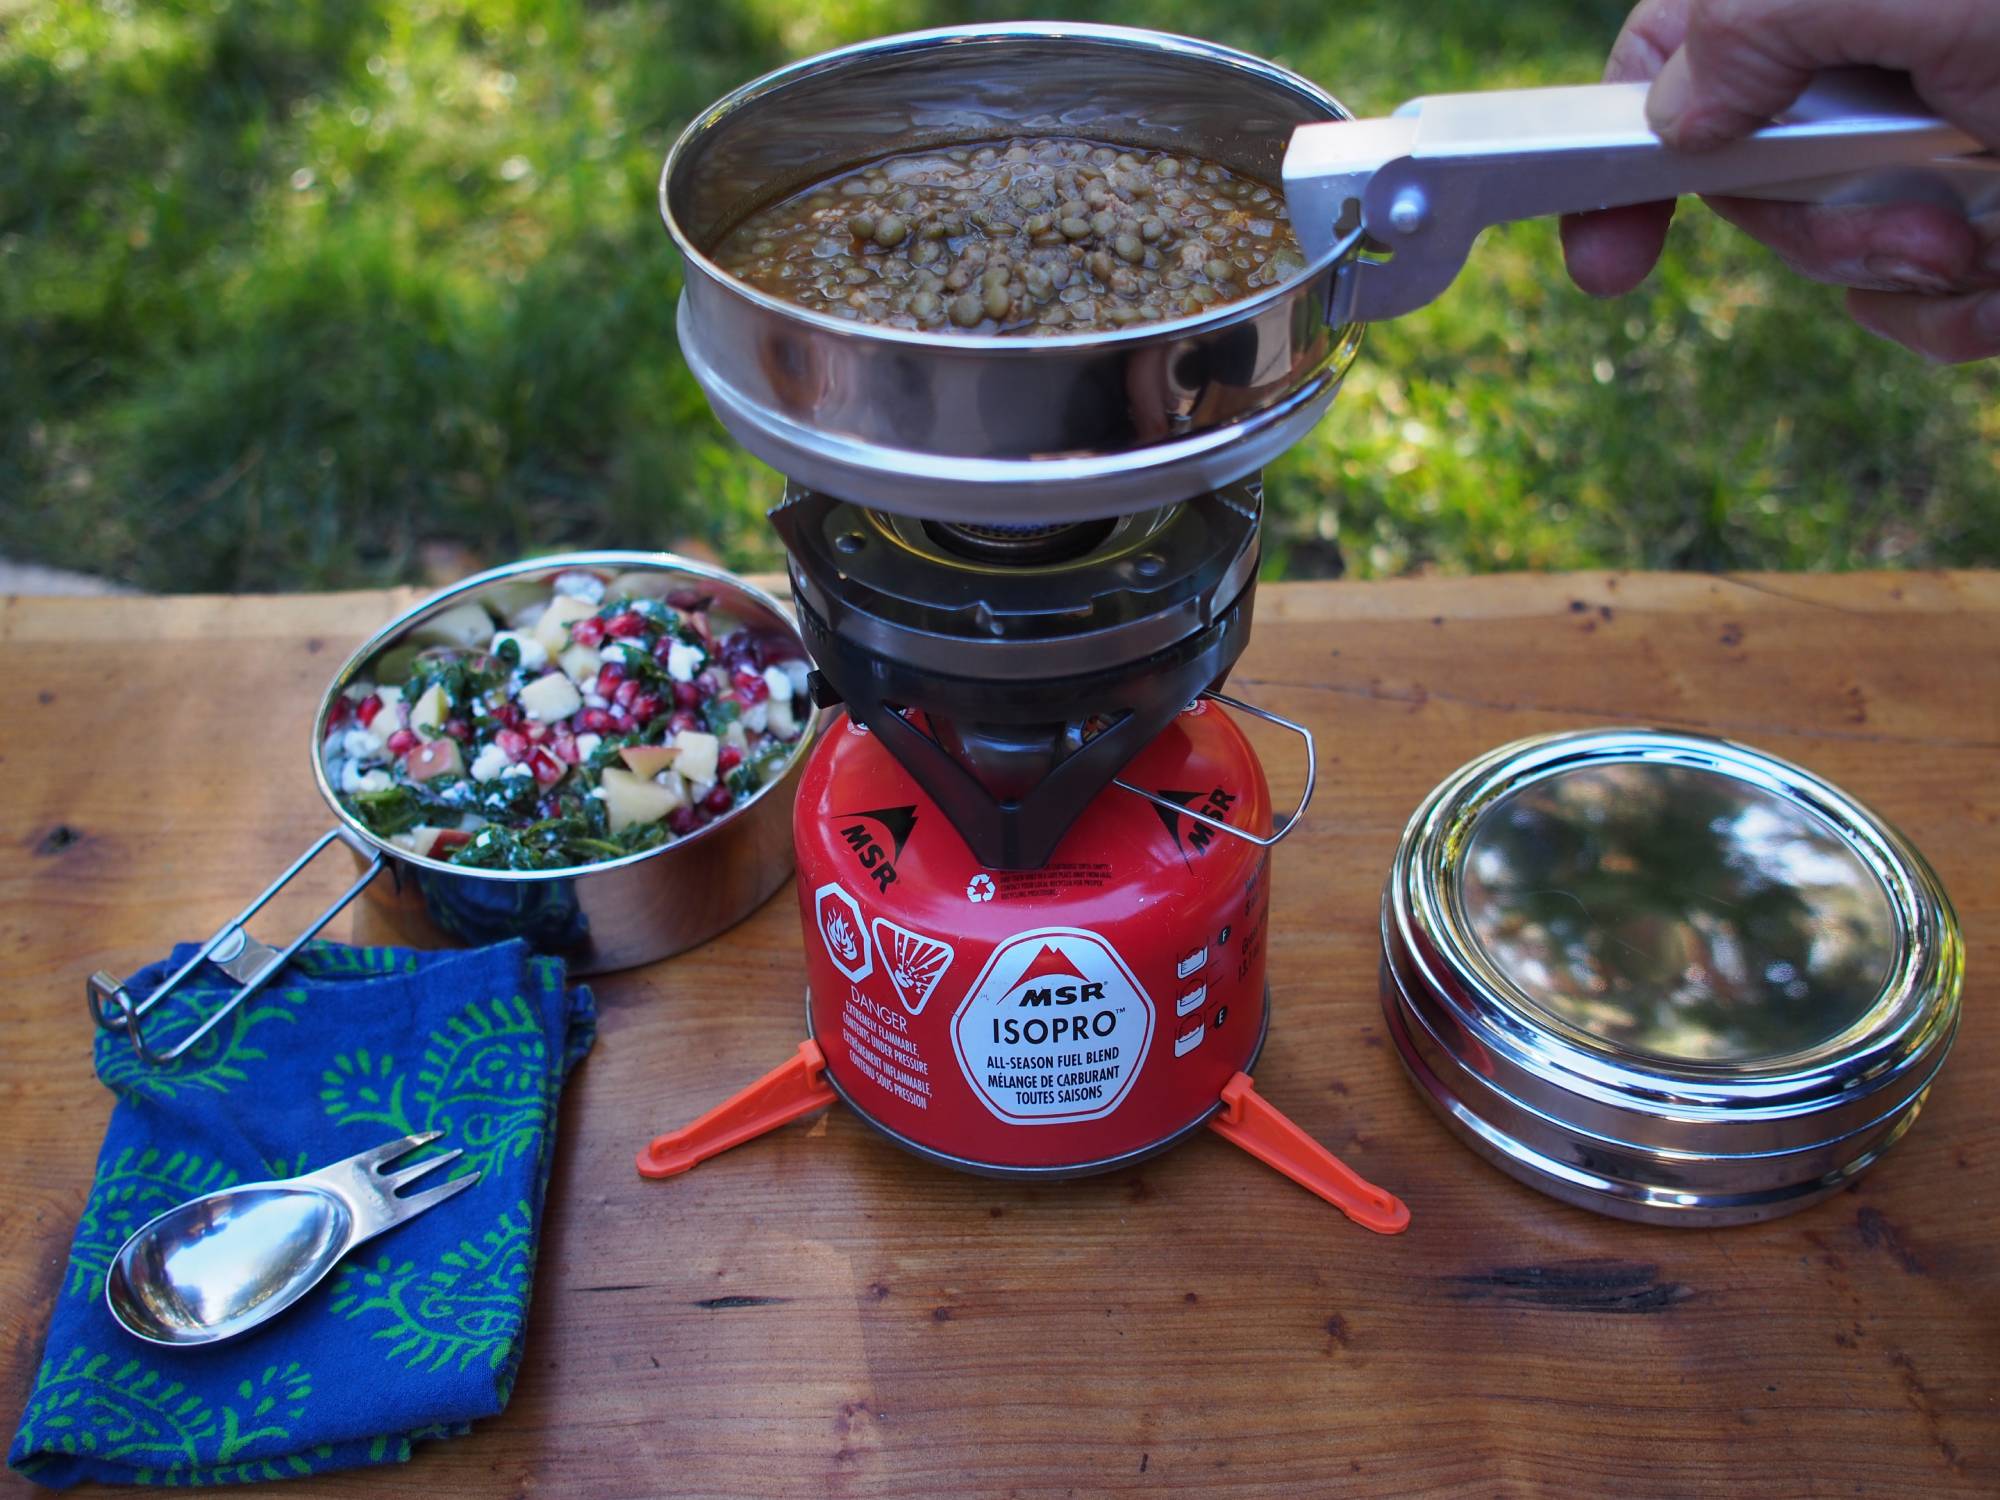 hand holding pot with lentils on camp stove